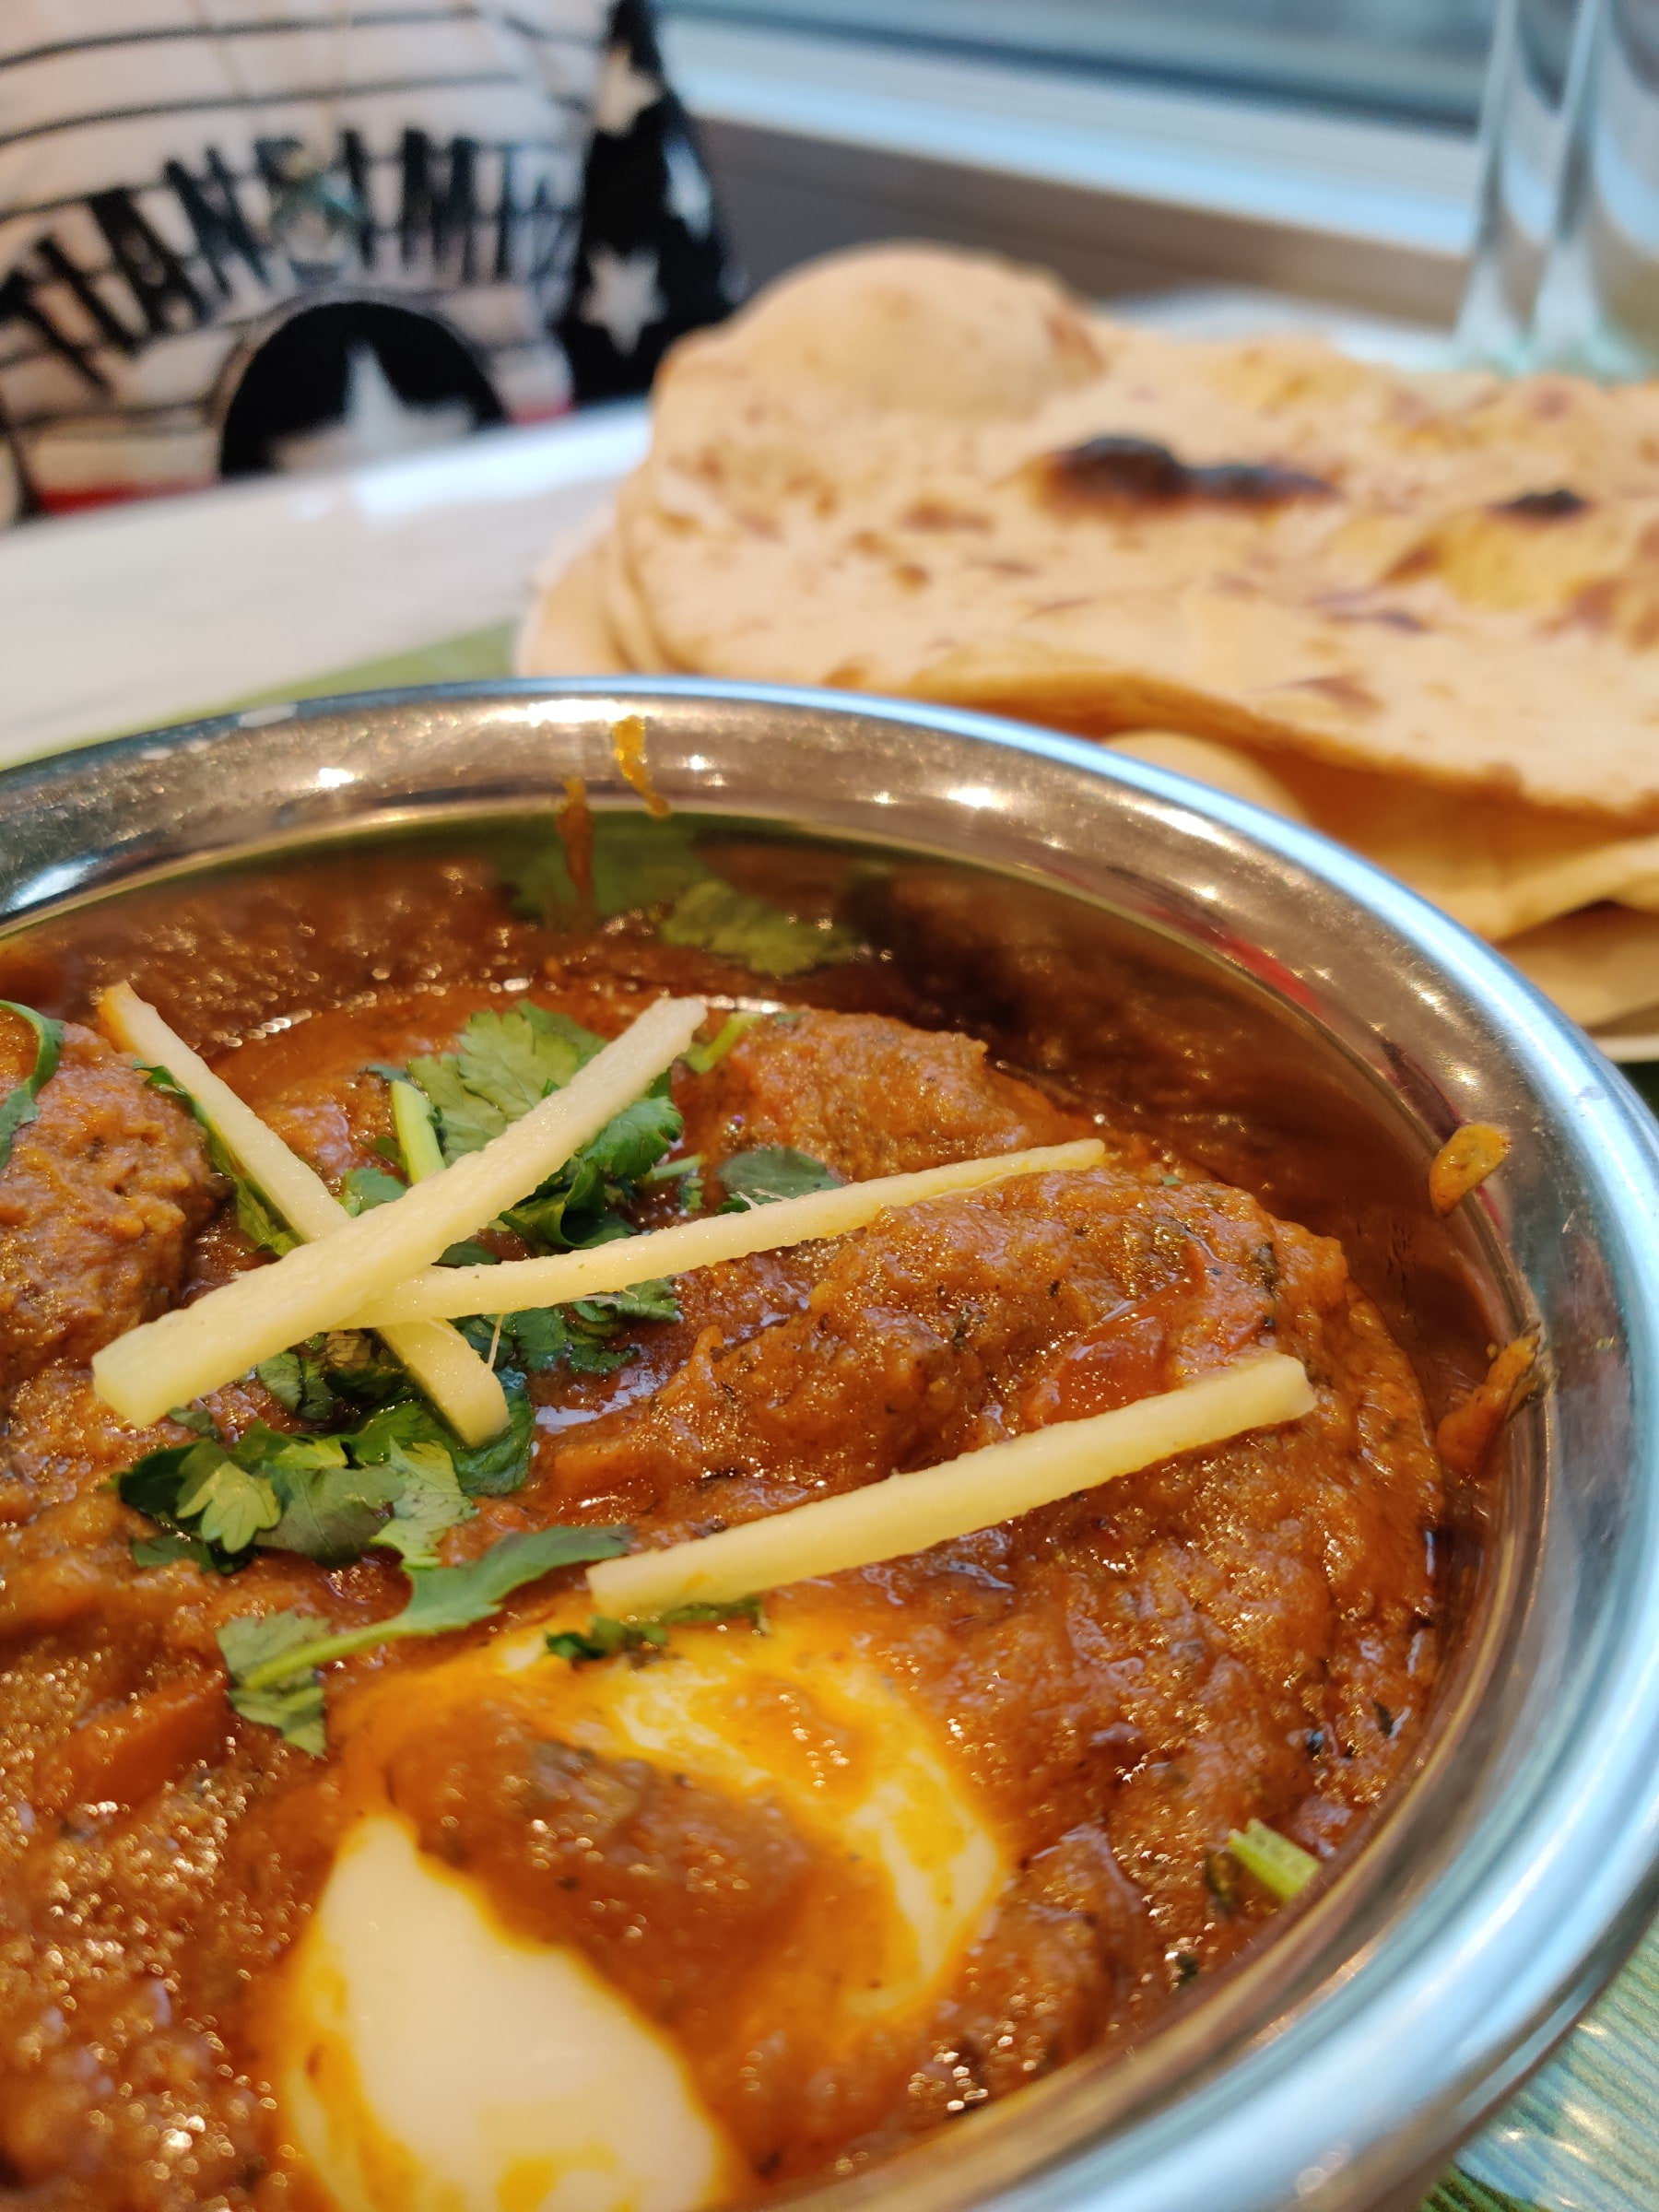 Beef Kofta – Photo from Anmol Sweets & Restaurant by Shahzad A. (28/03/2021)